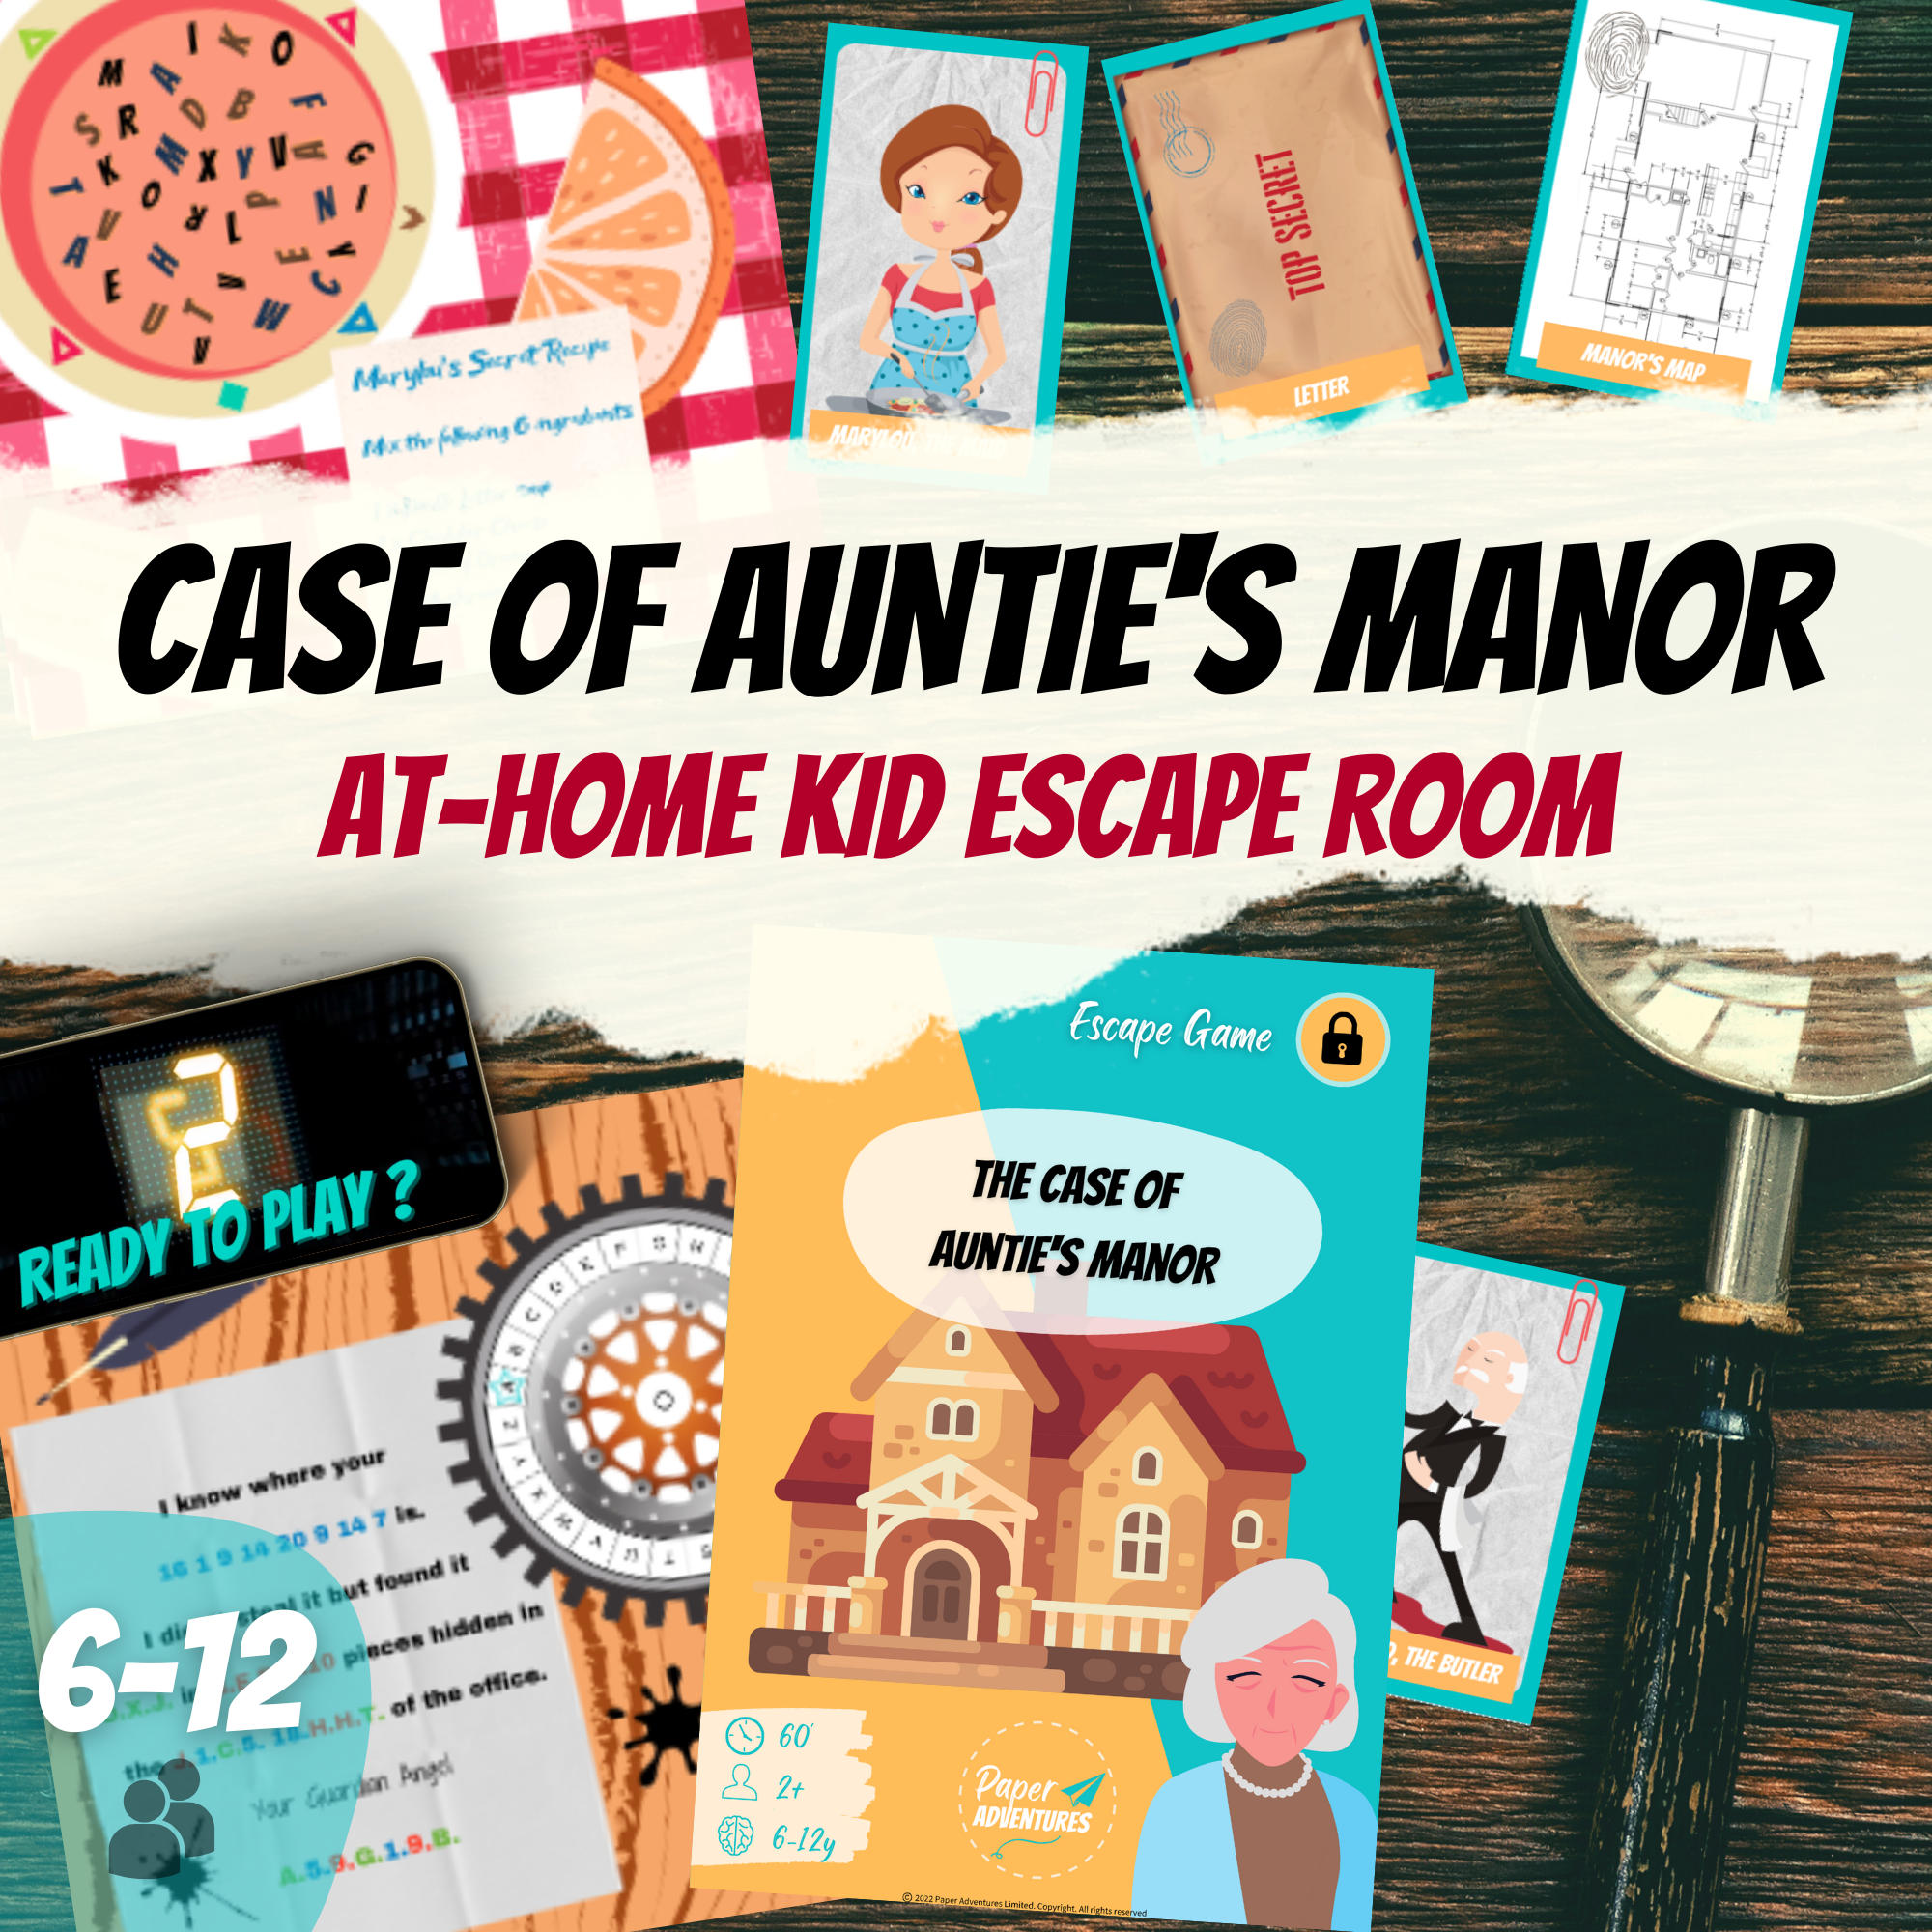 Escape Room Game kit for kids perfect for children birthday parties : Case of Auntie's Manor. Home family detective clue mystery who dunnit activity - cover